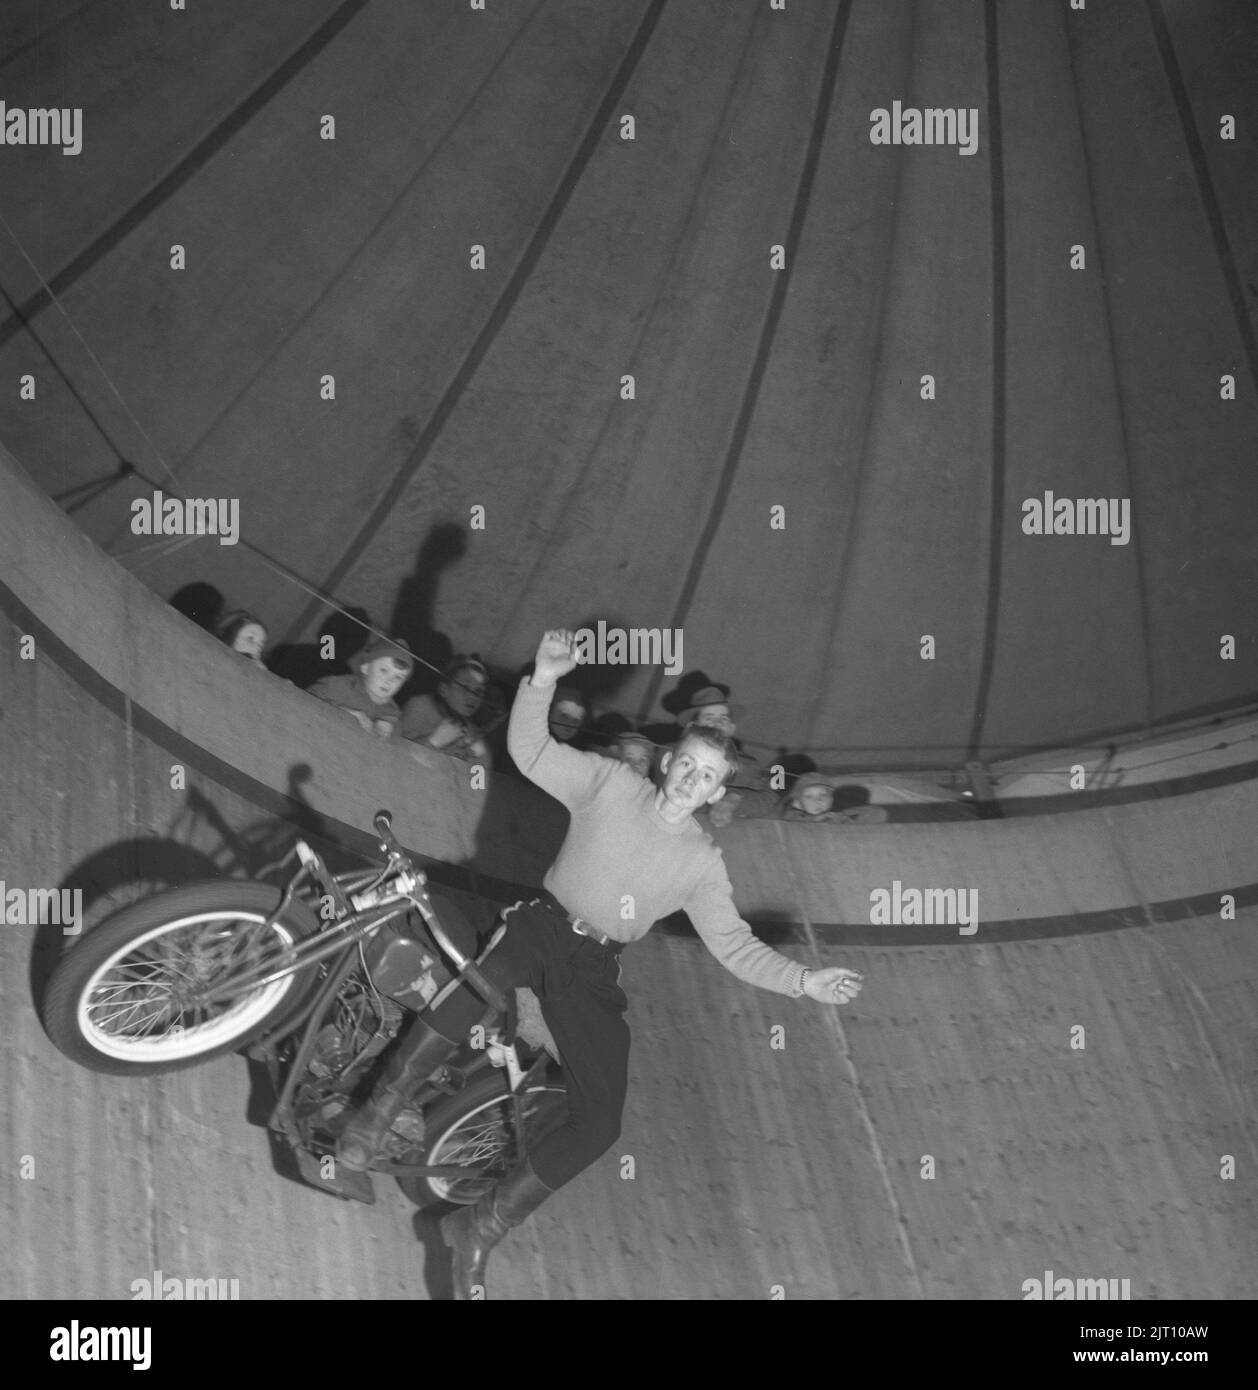 Motorcyclist in the 1940s. A A young man on his motorcycle during a show in The wall of death (sometimes known as The wall of death, motordrome, silodrome. Wall of death is a wooden planked barrel shaped arena where spectators watch from the top as motorcycles or other motorised vehicles ride around it at high speed,often performing other stunts. Sweden 1947 Conard ref 1103 Stock Photo